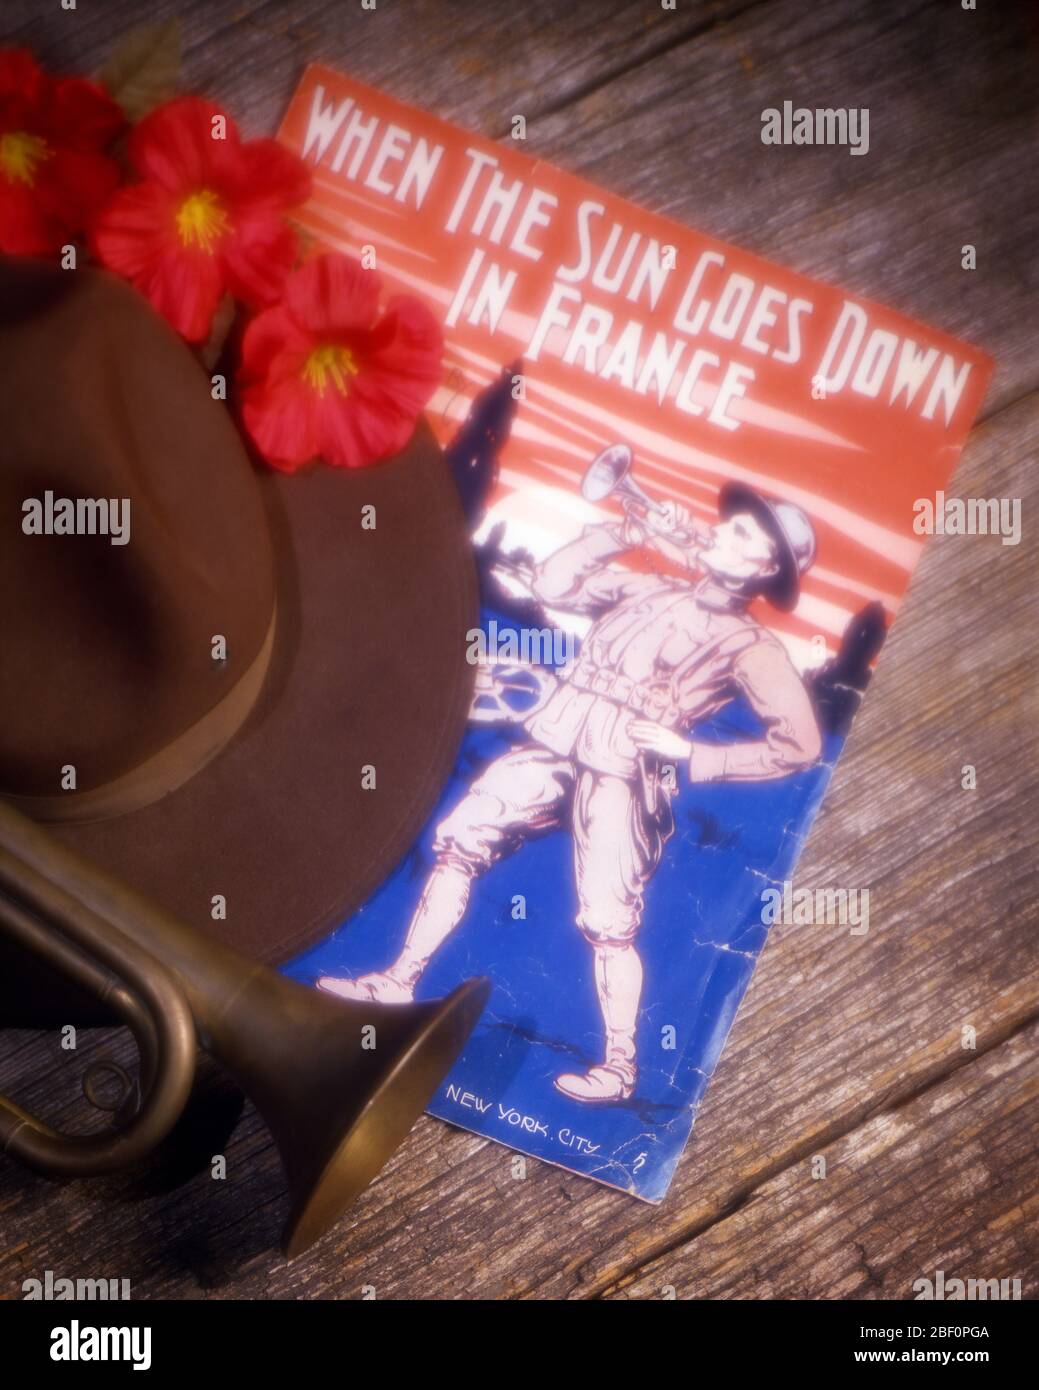 1919 WORLD WAR I STILL LIFE BUGLE, SOLDIER’S HAT POPPIES AND SHEET MUSIC OF WHEN SUN GOES DOWN IN FRANCE WITH DRAWING OF SOLDIER - ks17722 HAR001 HARS UNIFORMS MUSICAL INSTRUMENT CAMPAIGN CONCEPTUAL STILL LIFE PATRIOTIC BUGLE WORLD WAR ONE WW1 GOES HAR001 OLD FASHIONED Stock Photo